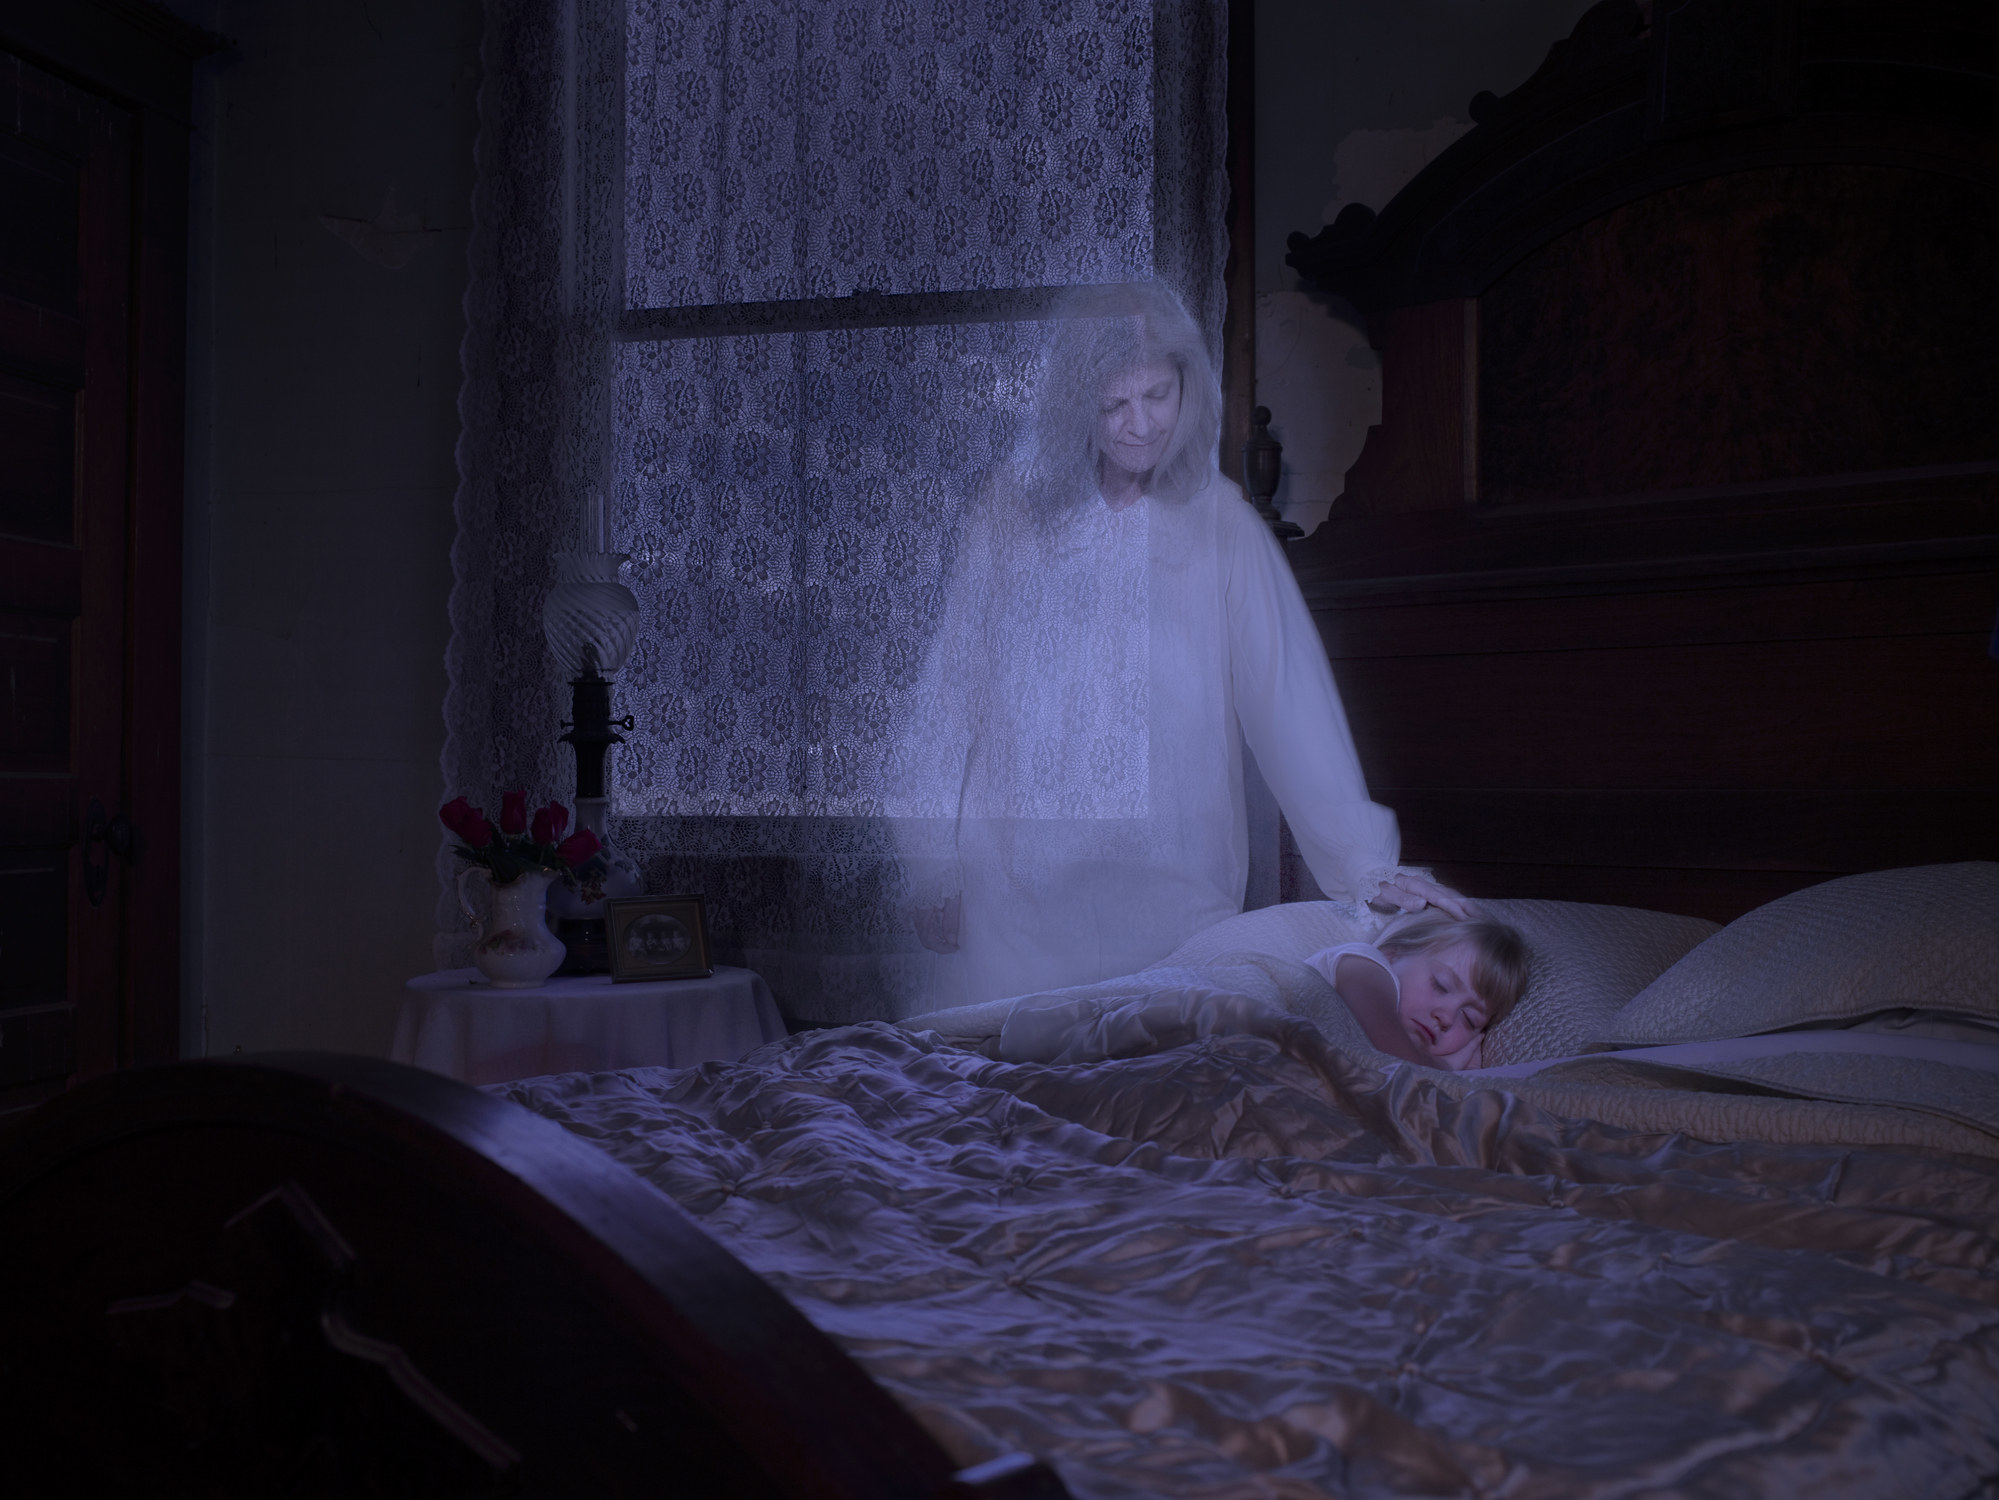 a ghost touching a sleeping child